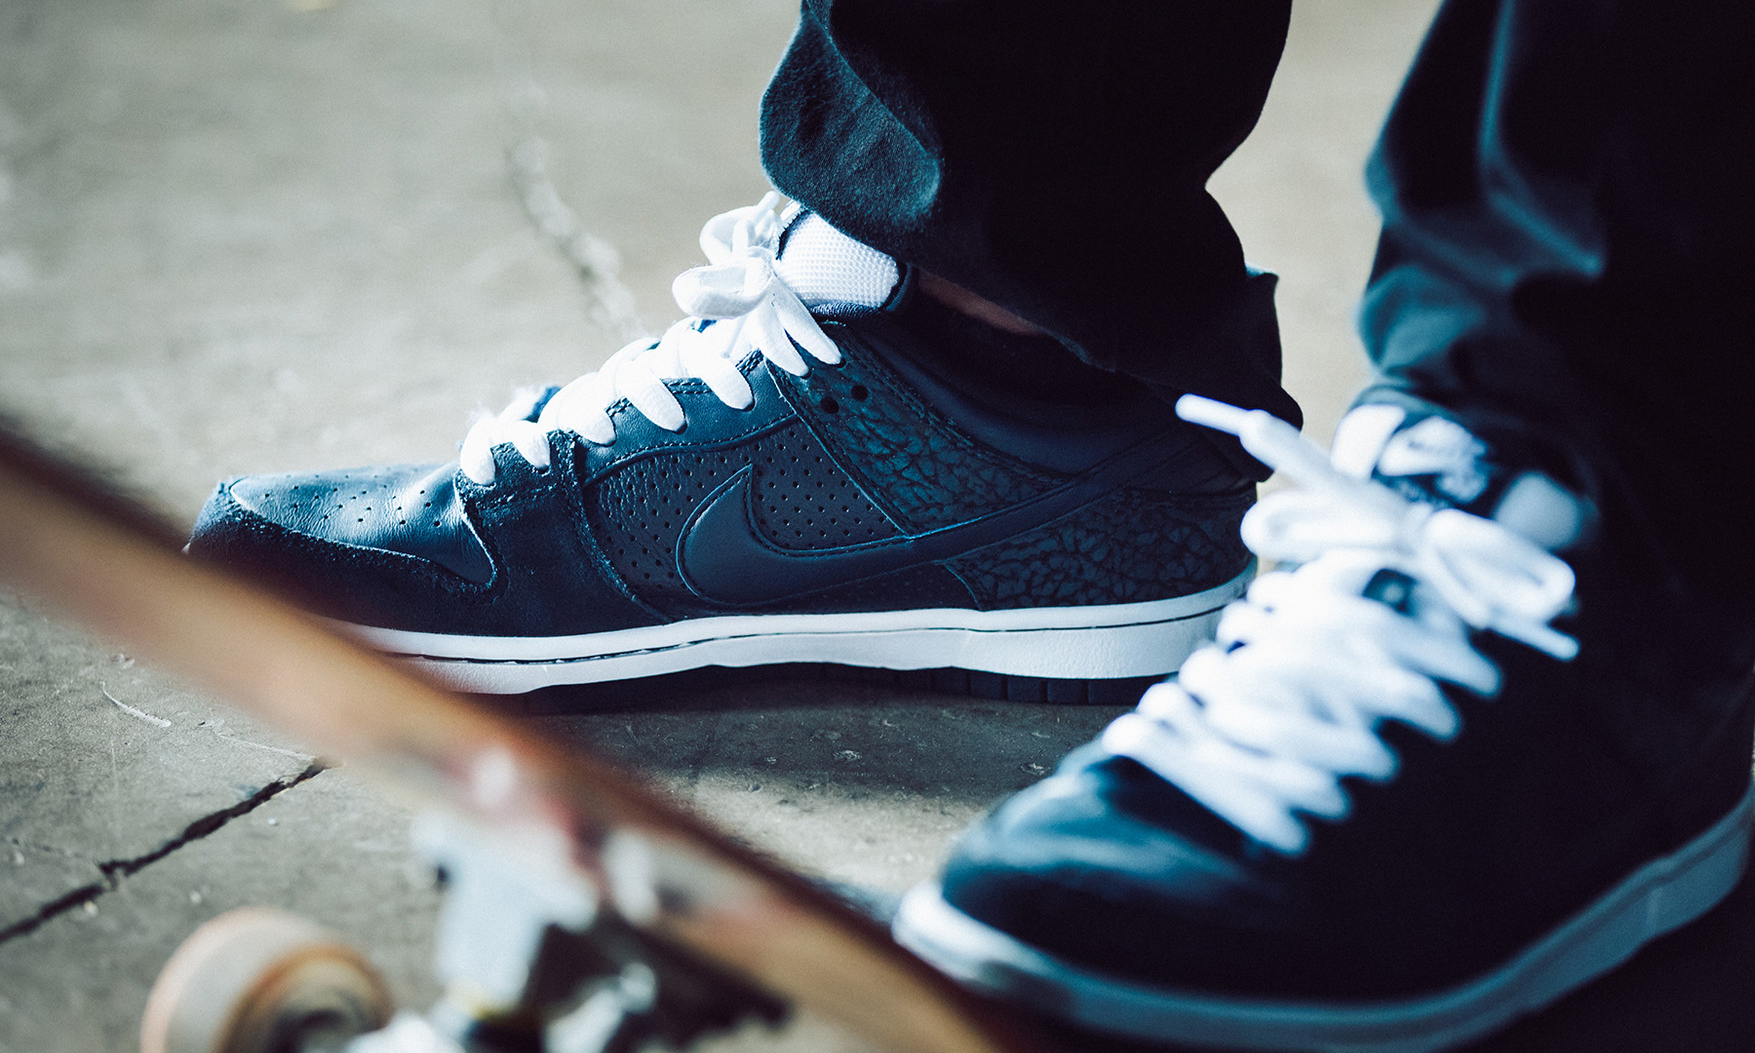 Nike SB Dunk Low “Road To Tokyo” 别注款